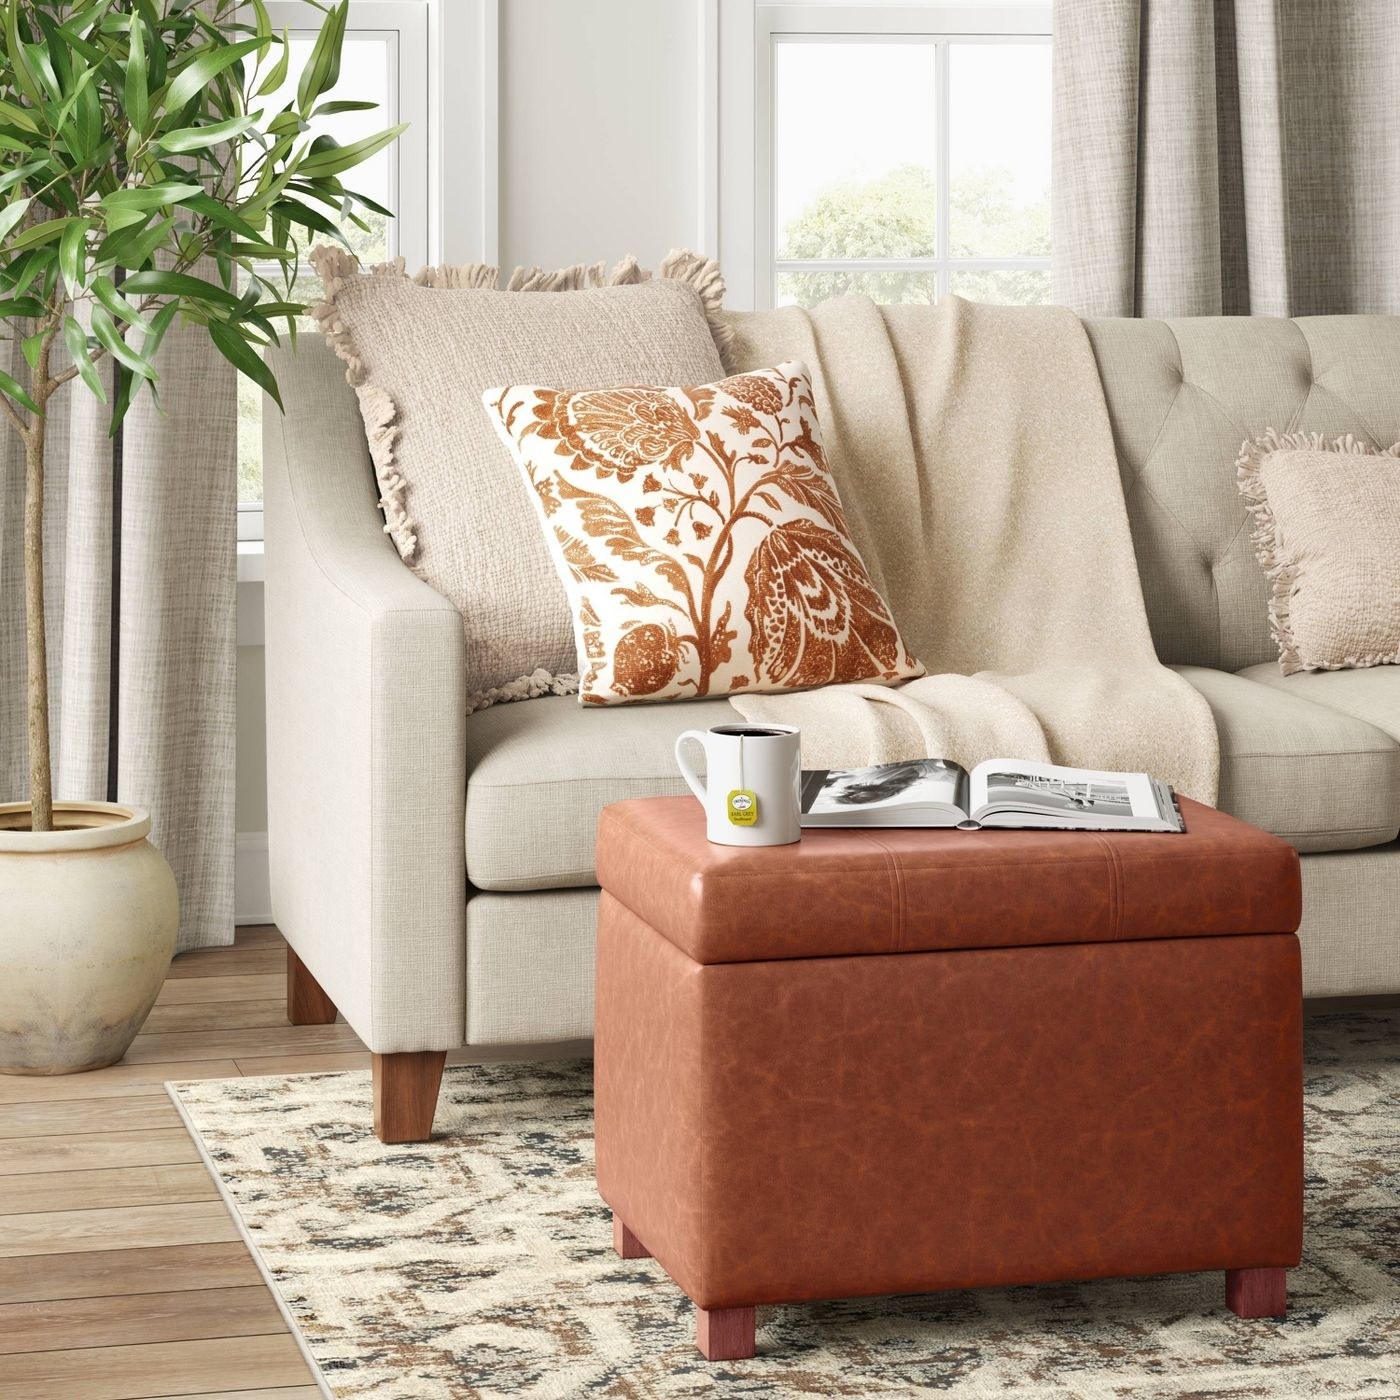 the brown leather ottoman in a living room